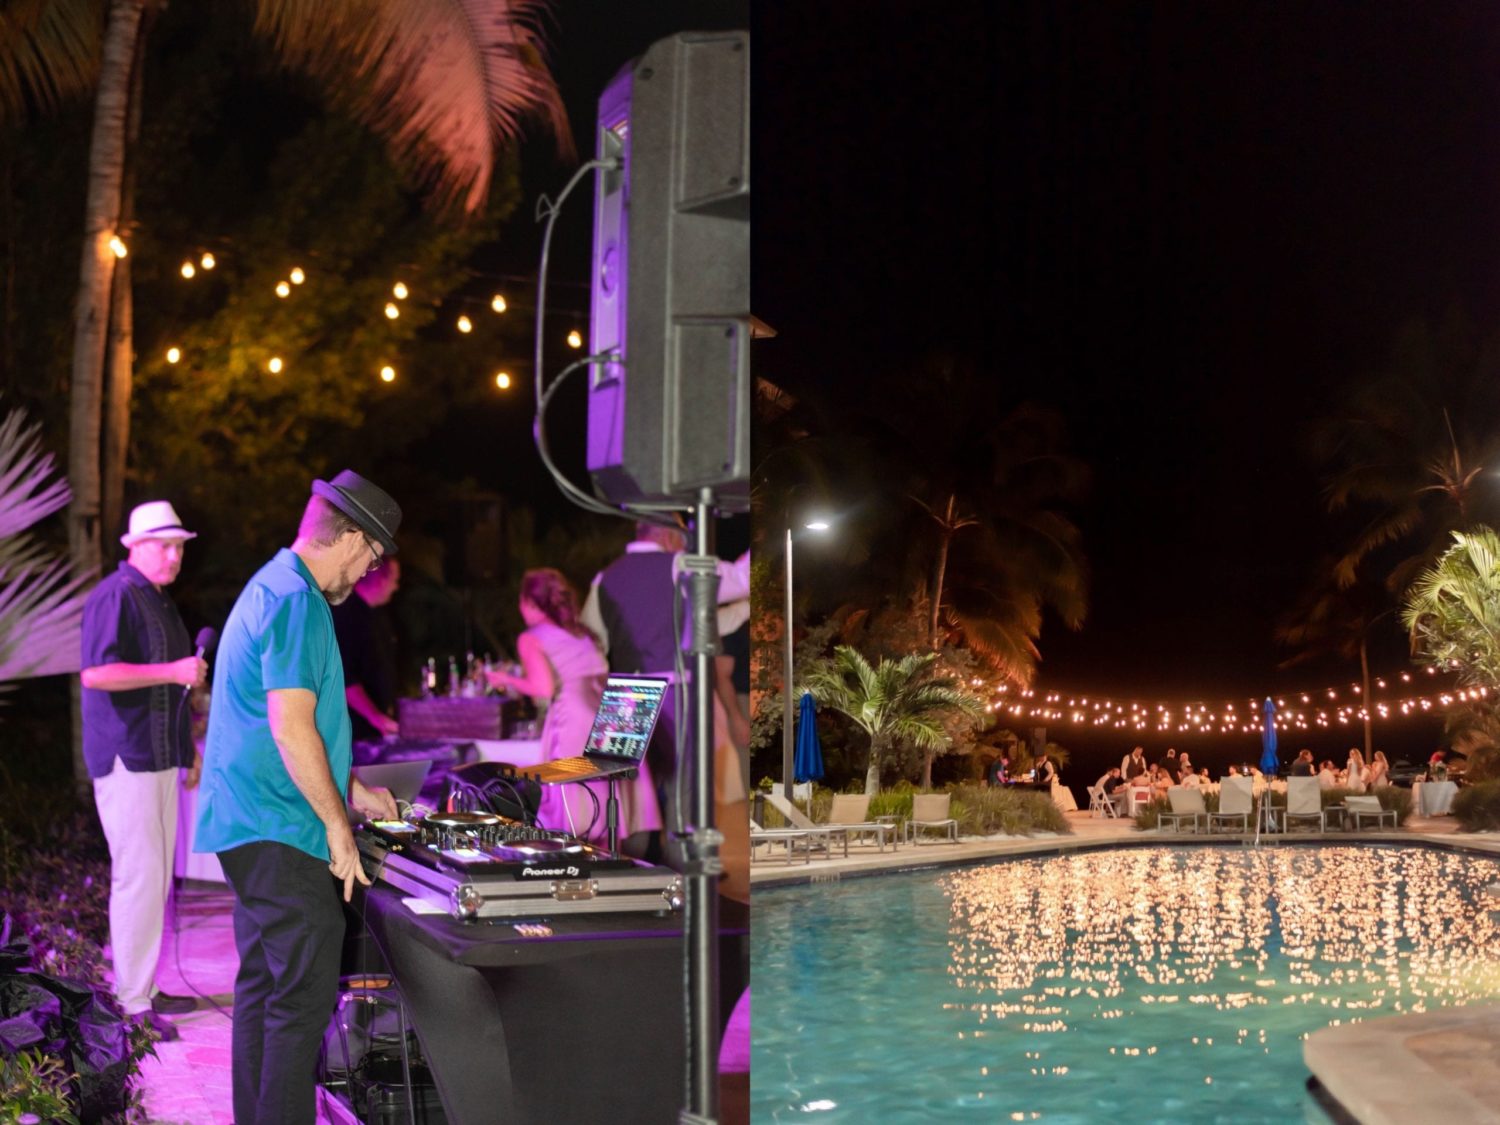 florida outdoor wedding at night reception party view from pool dj